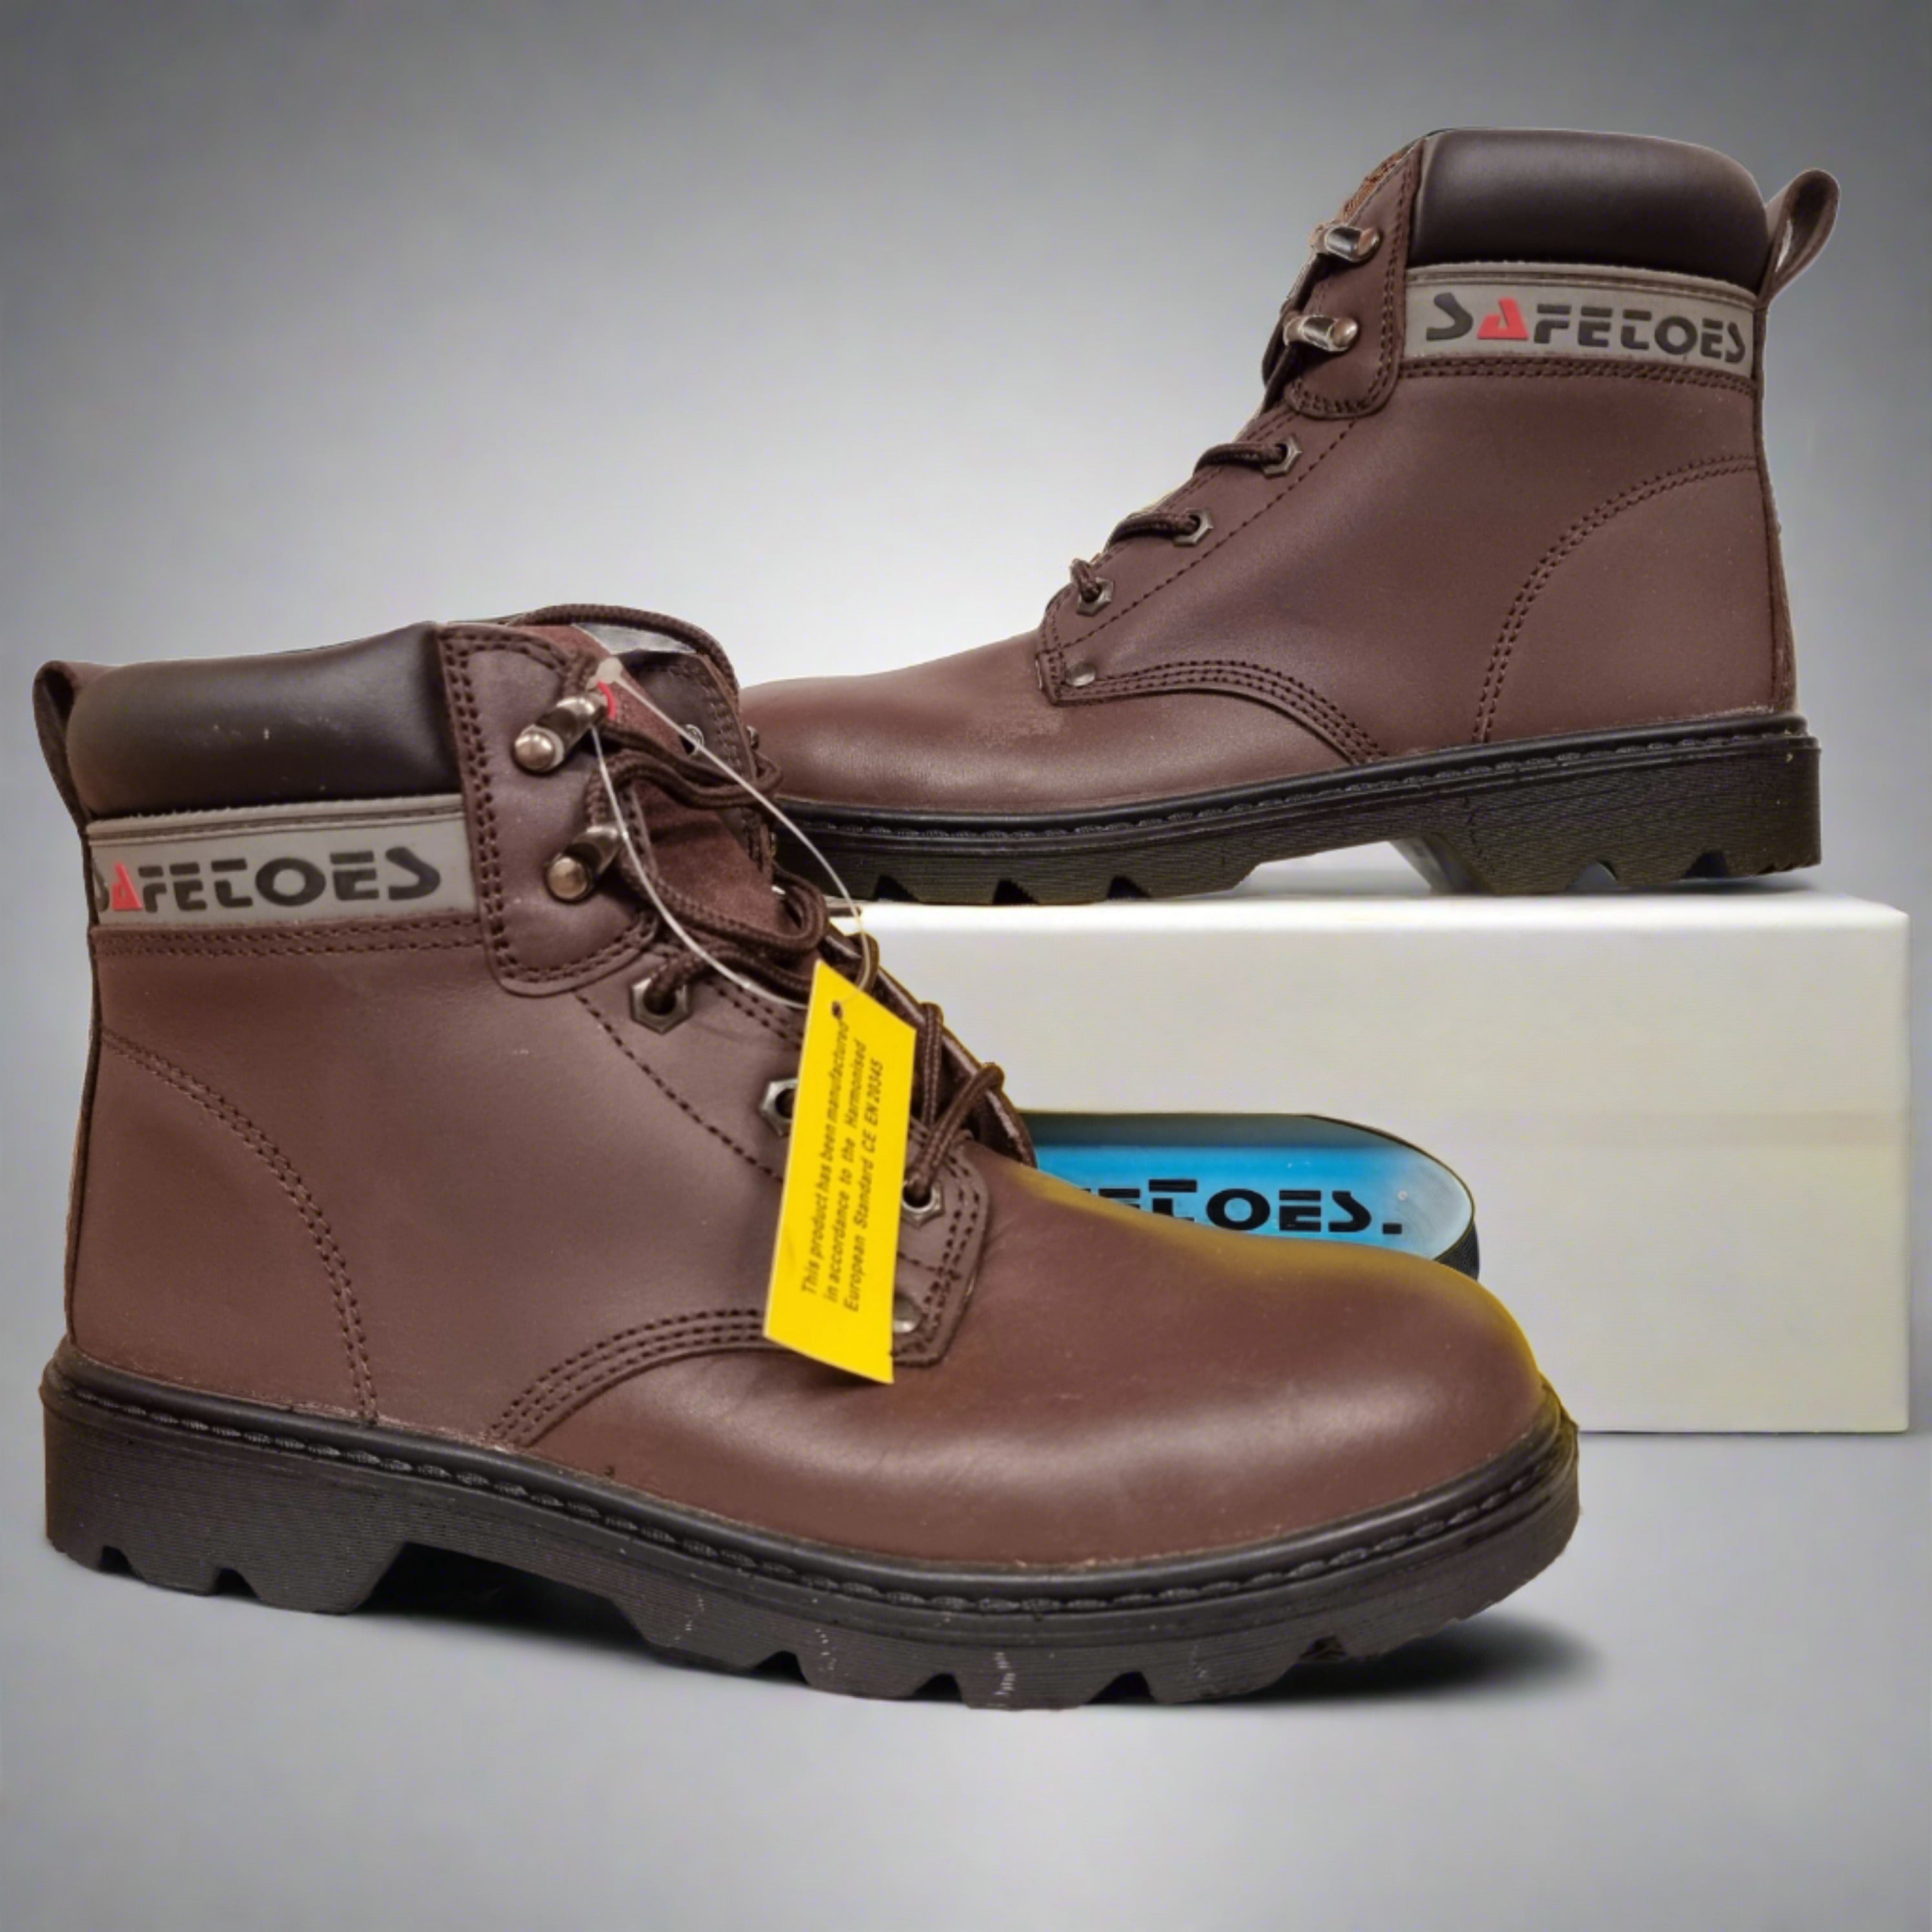 Safetoes S3002 Brown Leather Derby Safety Steel Toe Boots - UK Size 5